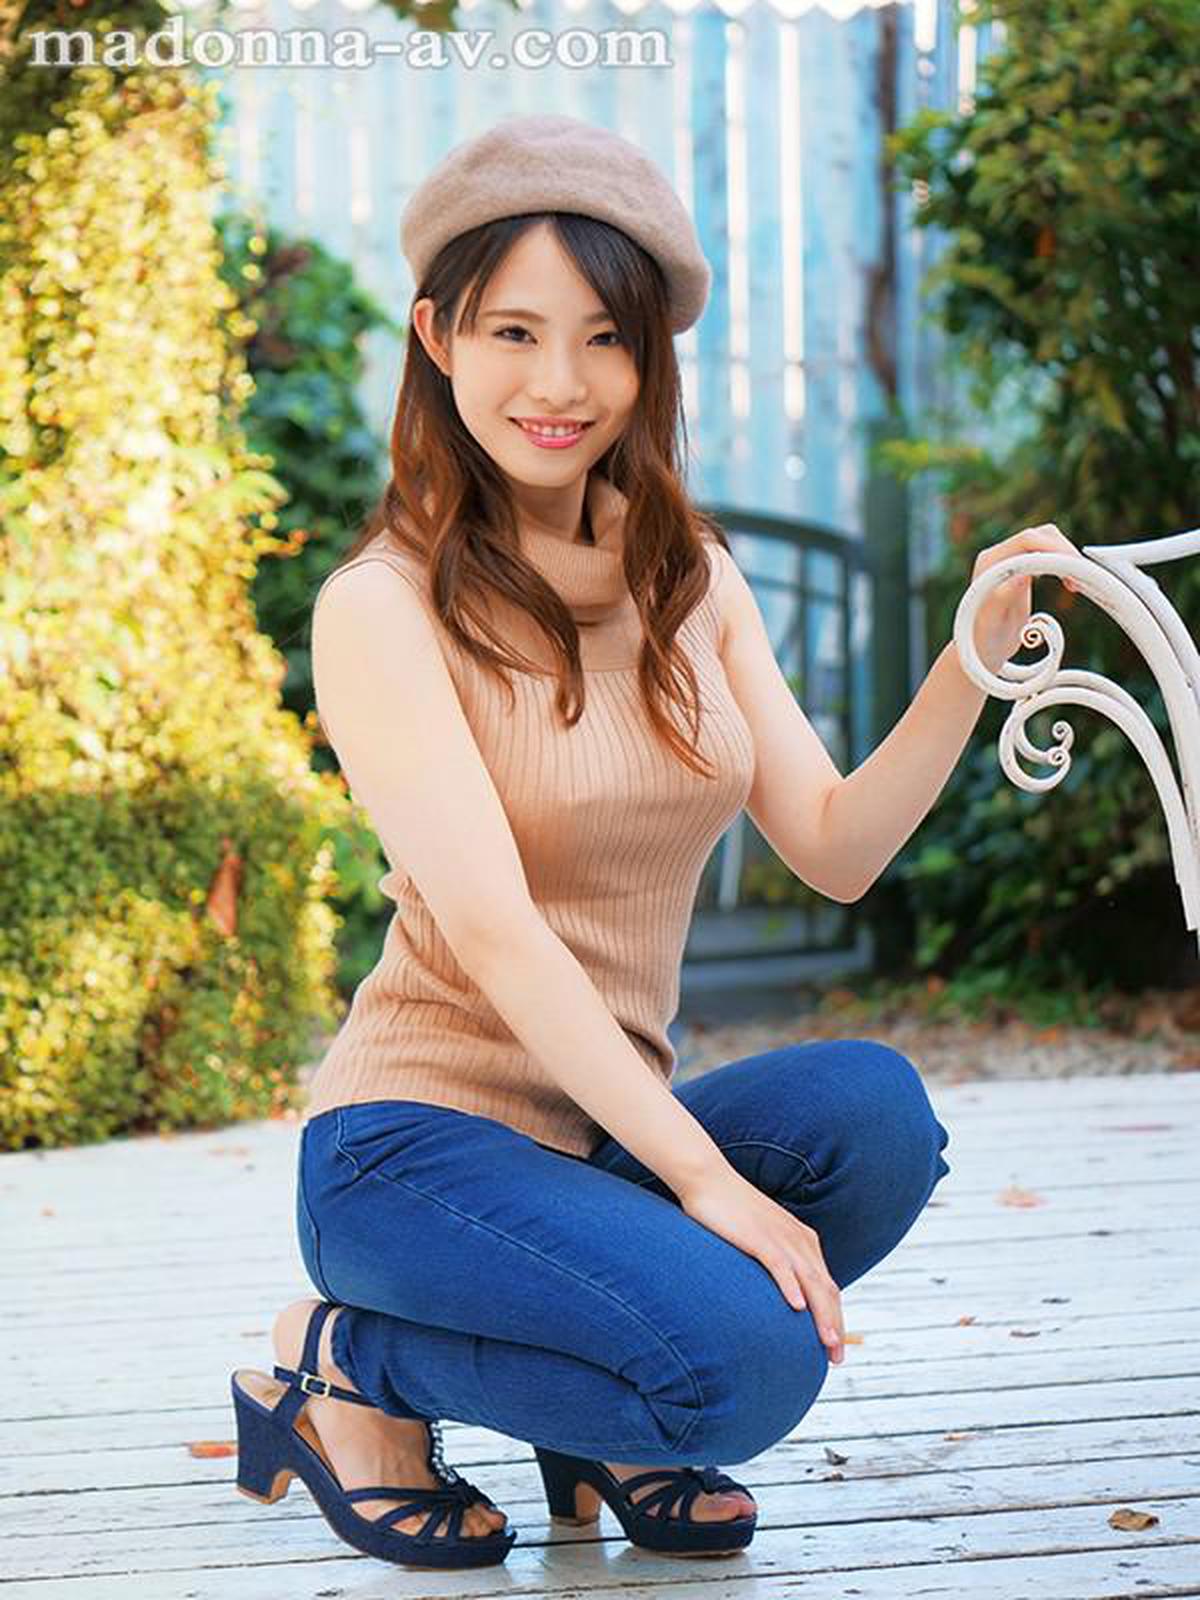 6000Kbps FHD JUL-136 A beautiful woman who decorates the magazine of a certain housewife is a parent-child model full of breast milk. Aimi 27 years old AV Debut-! # Magazine mom model # Latest AV trends